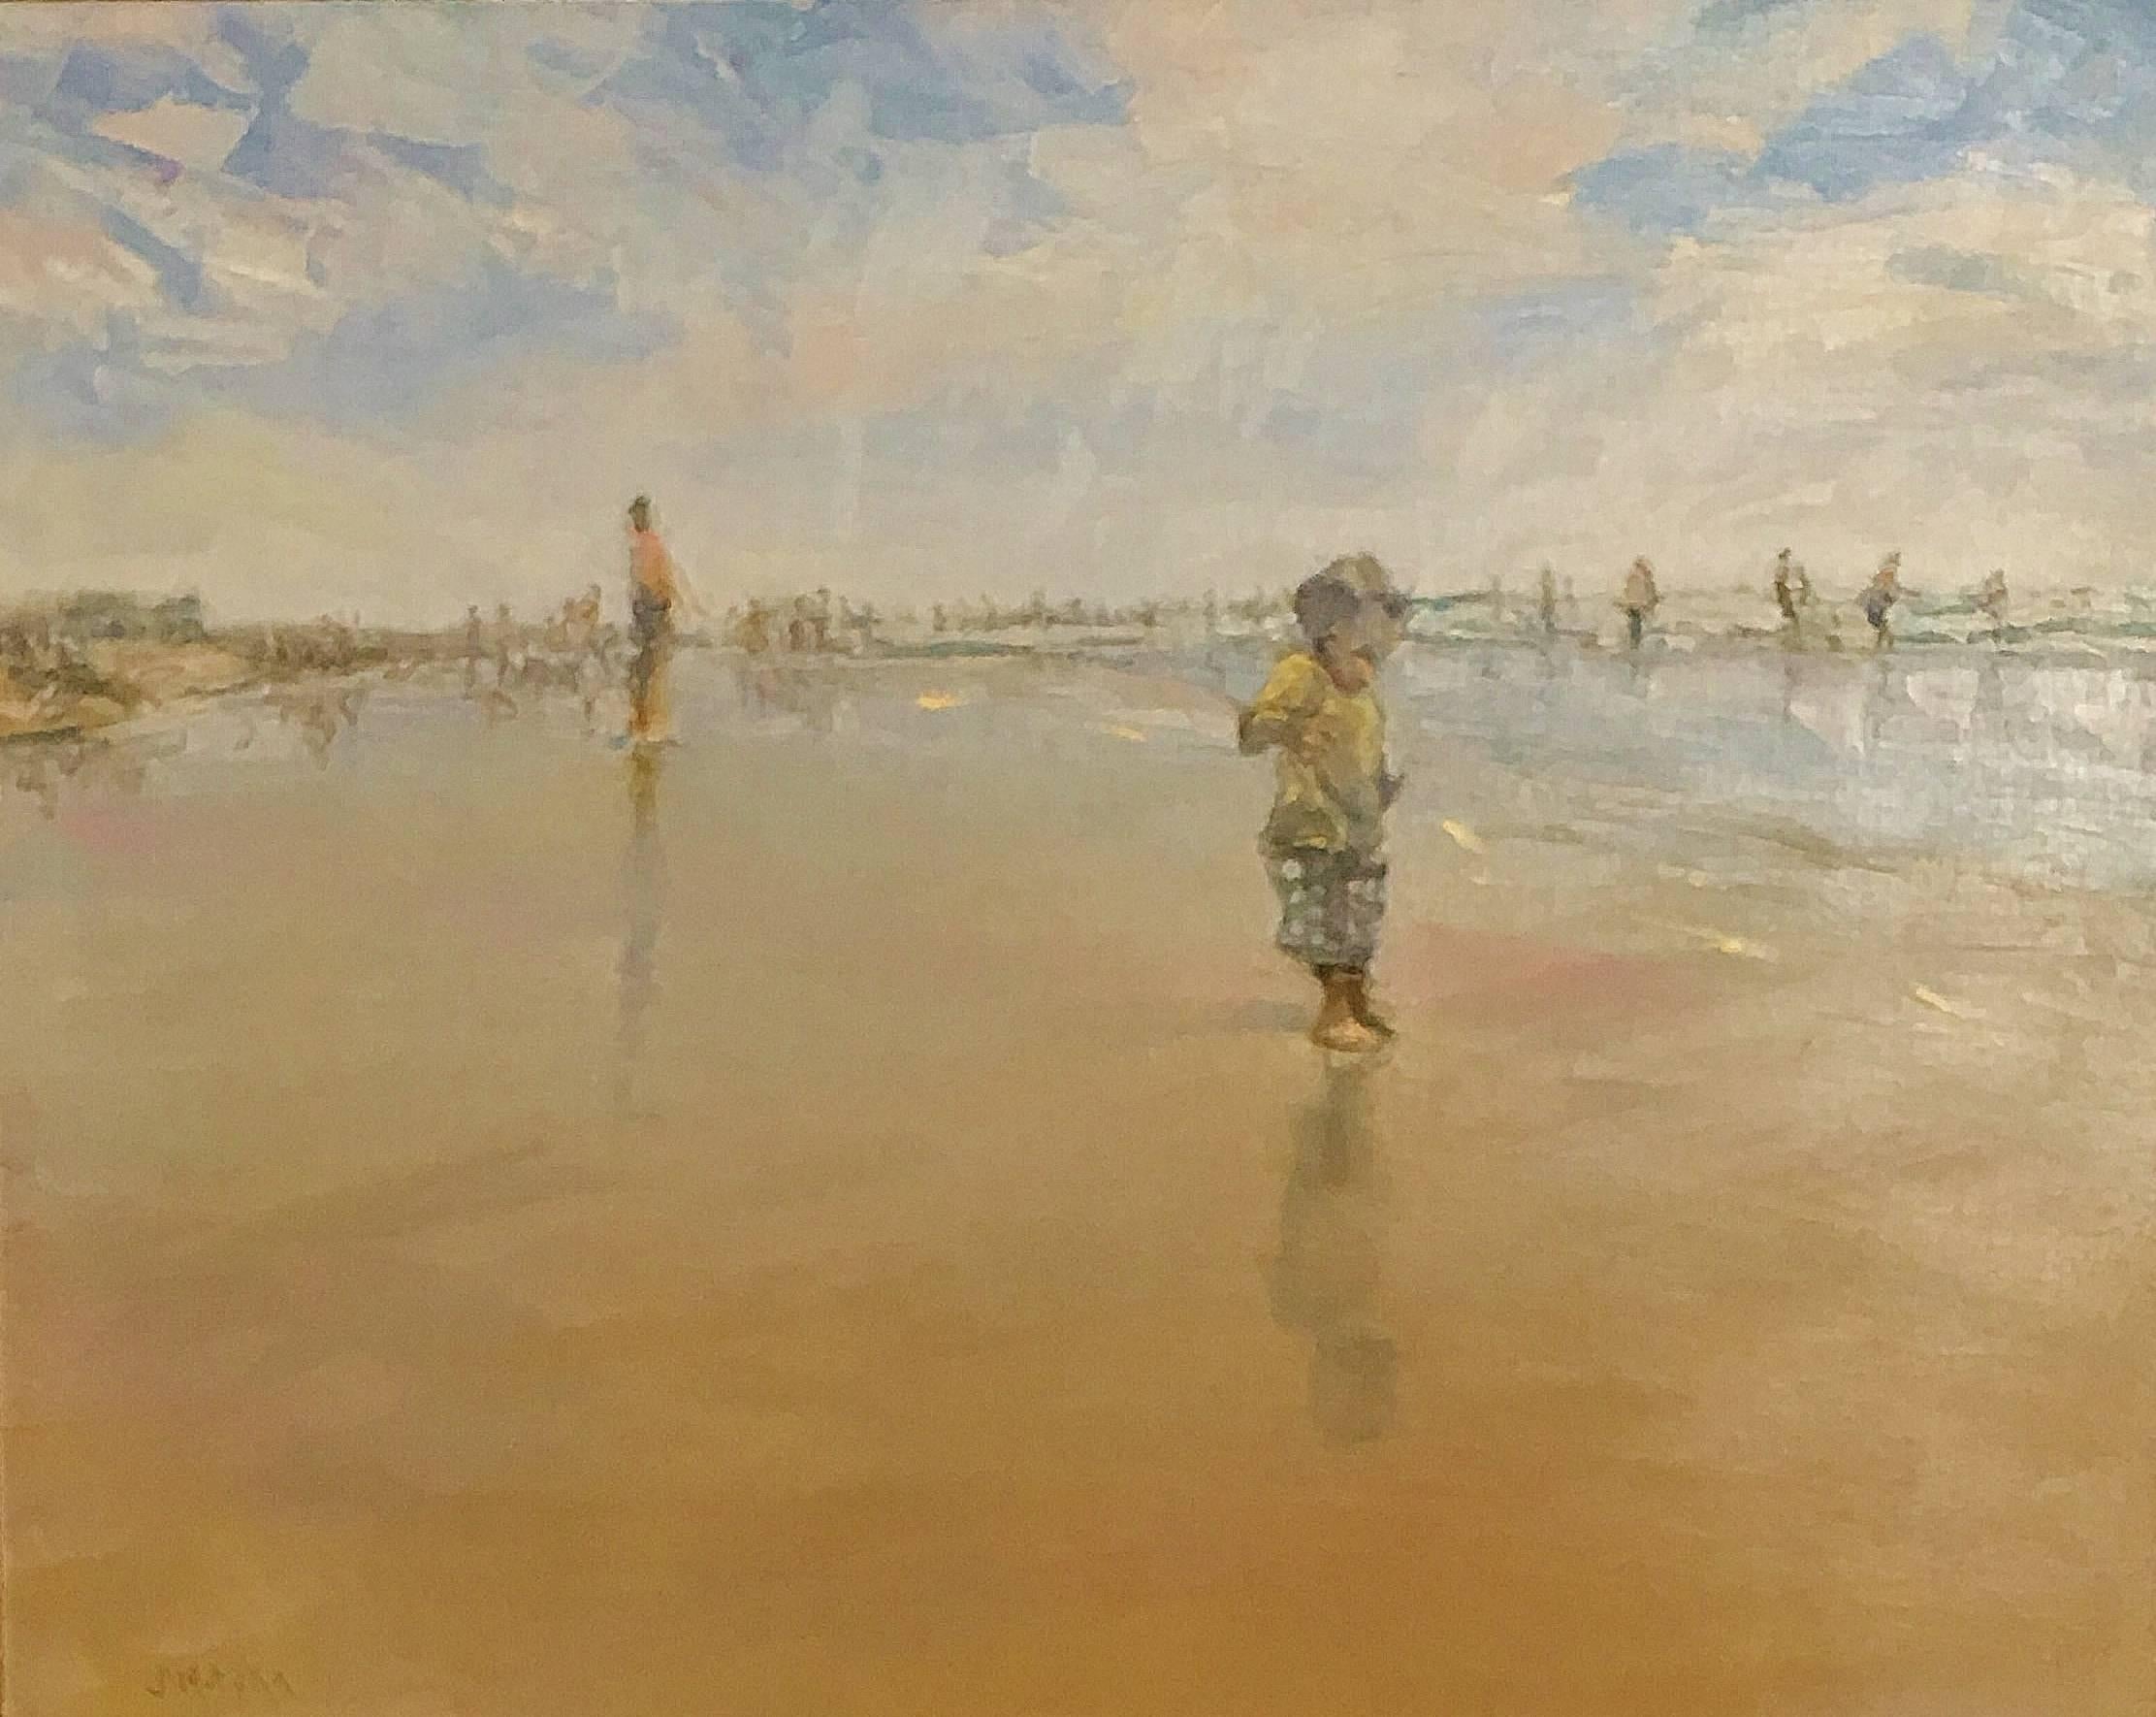 Steve Motyka Figurative Painting - Playing in the Sand, Watch Hill